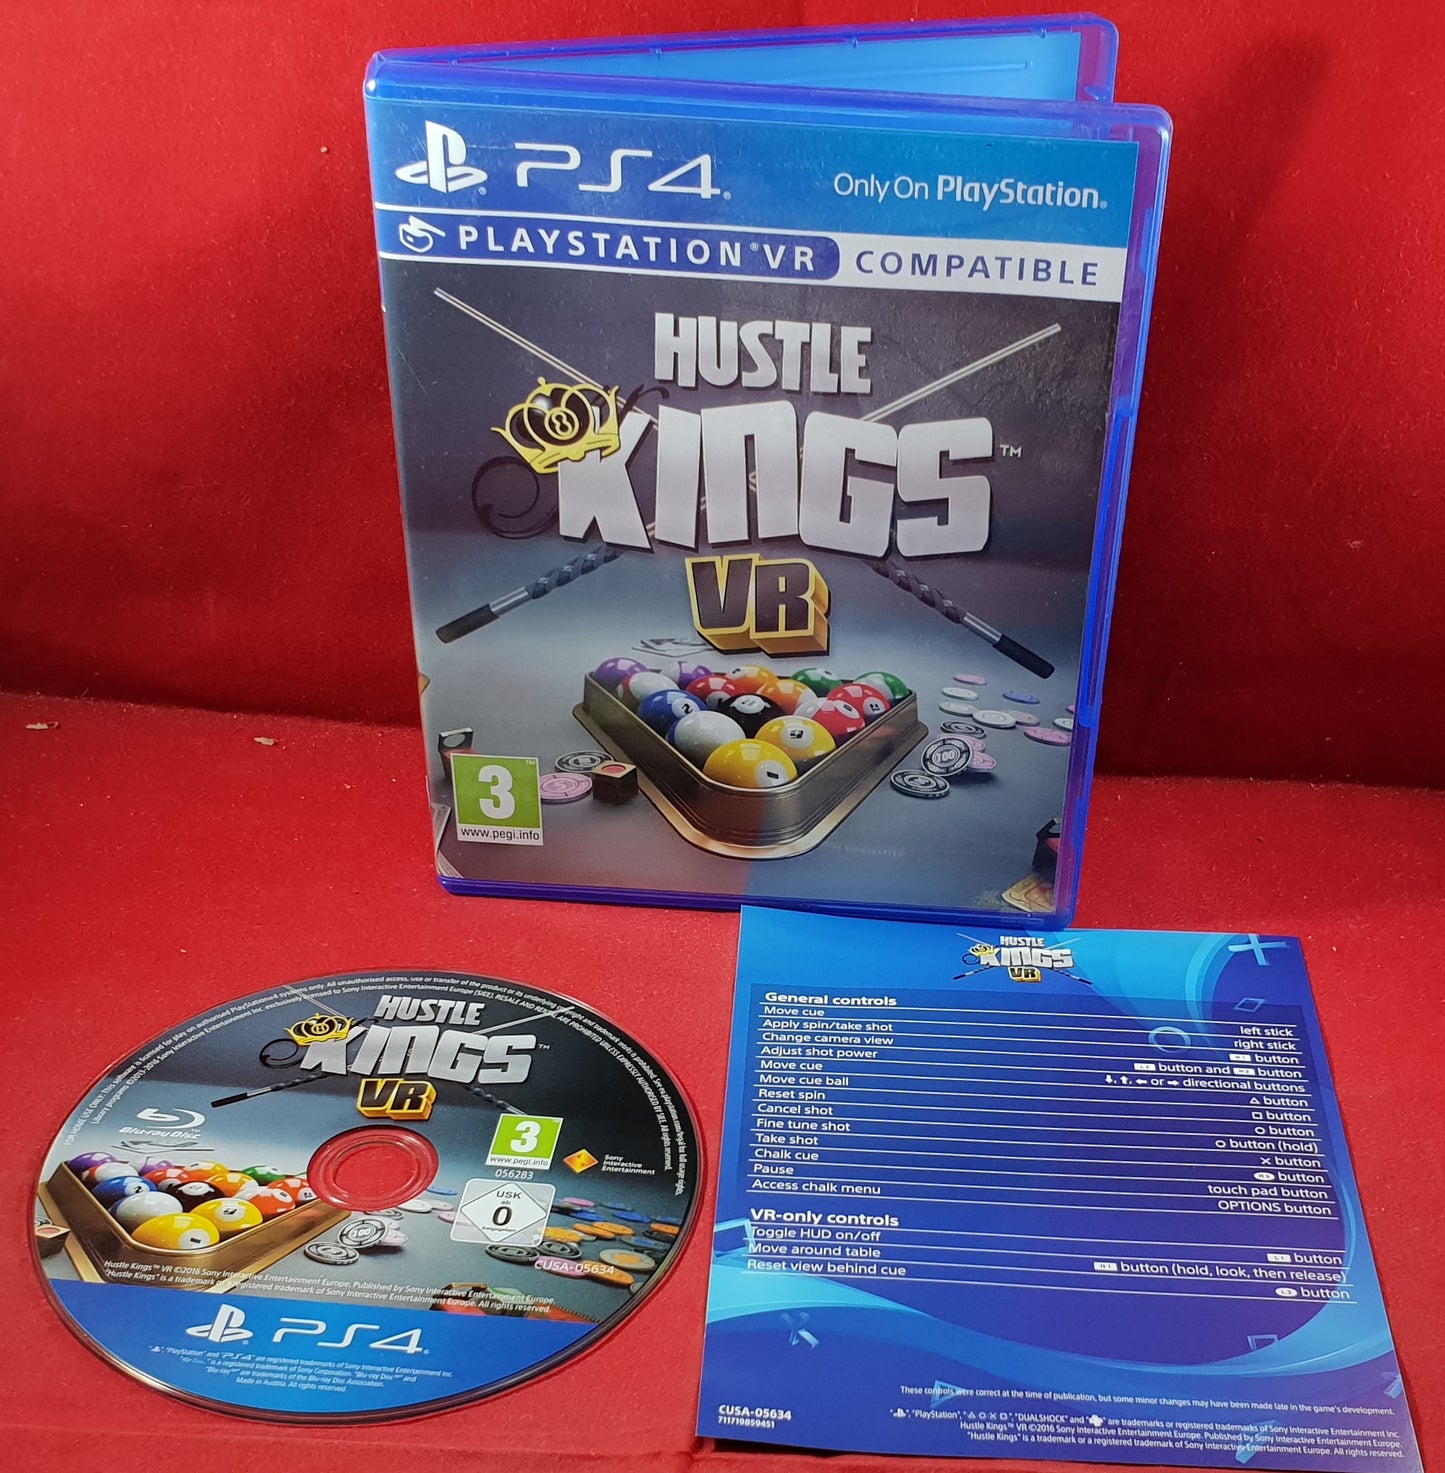 Hustle Kings VR Sony Playstation 4 (PS4) Game